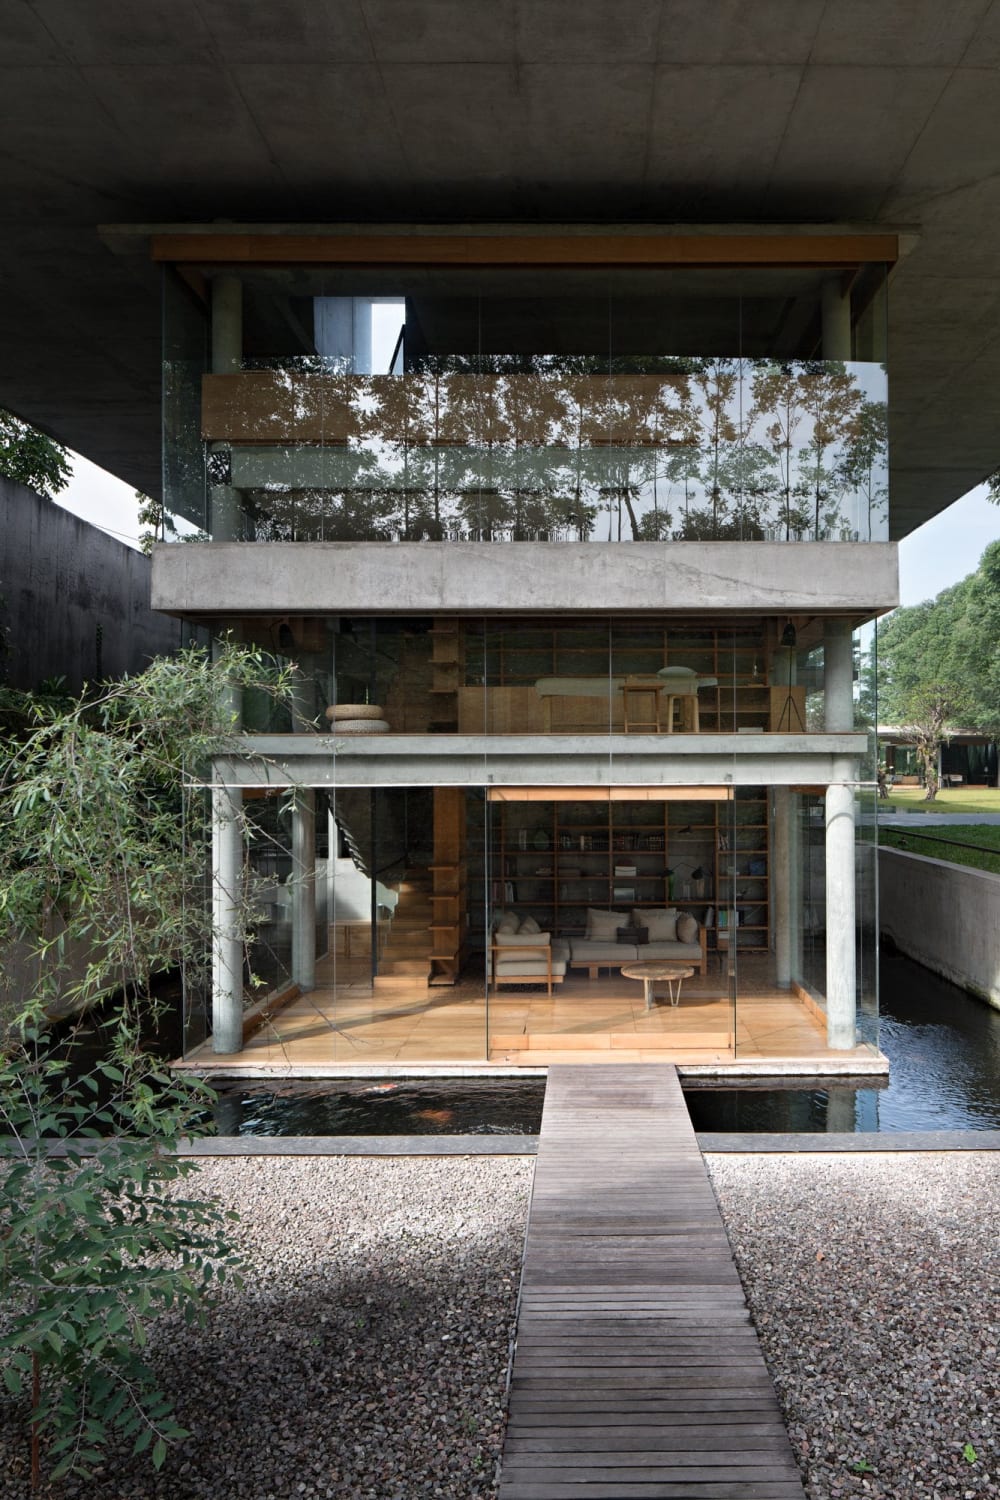 Living space surrounded by a koi pond with a bridge connected to a patio below ground level, Bandung, West Java Province, Indonesia